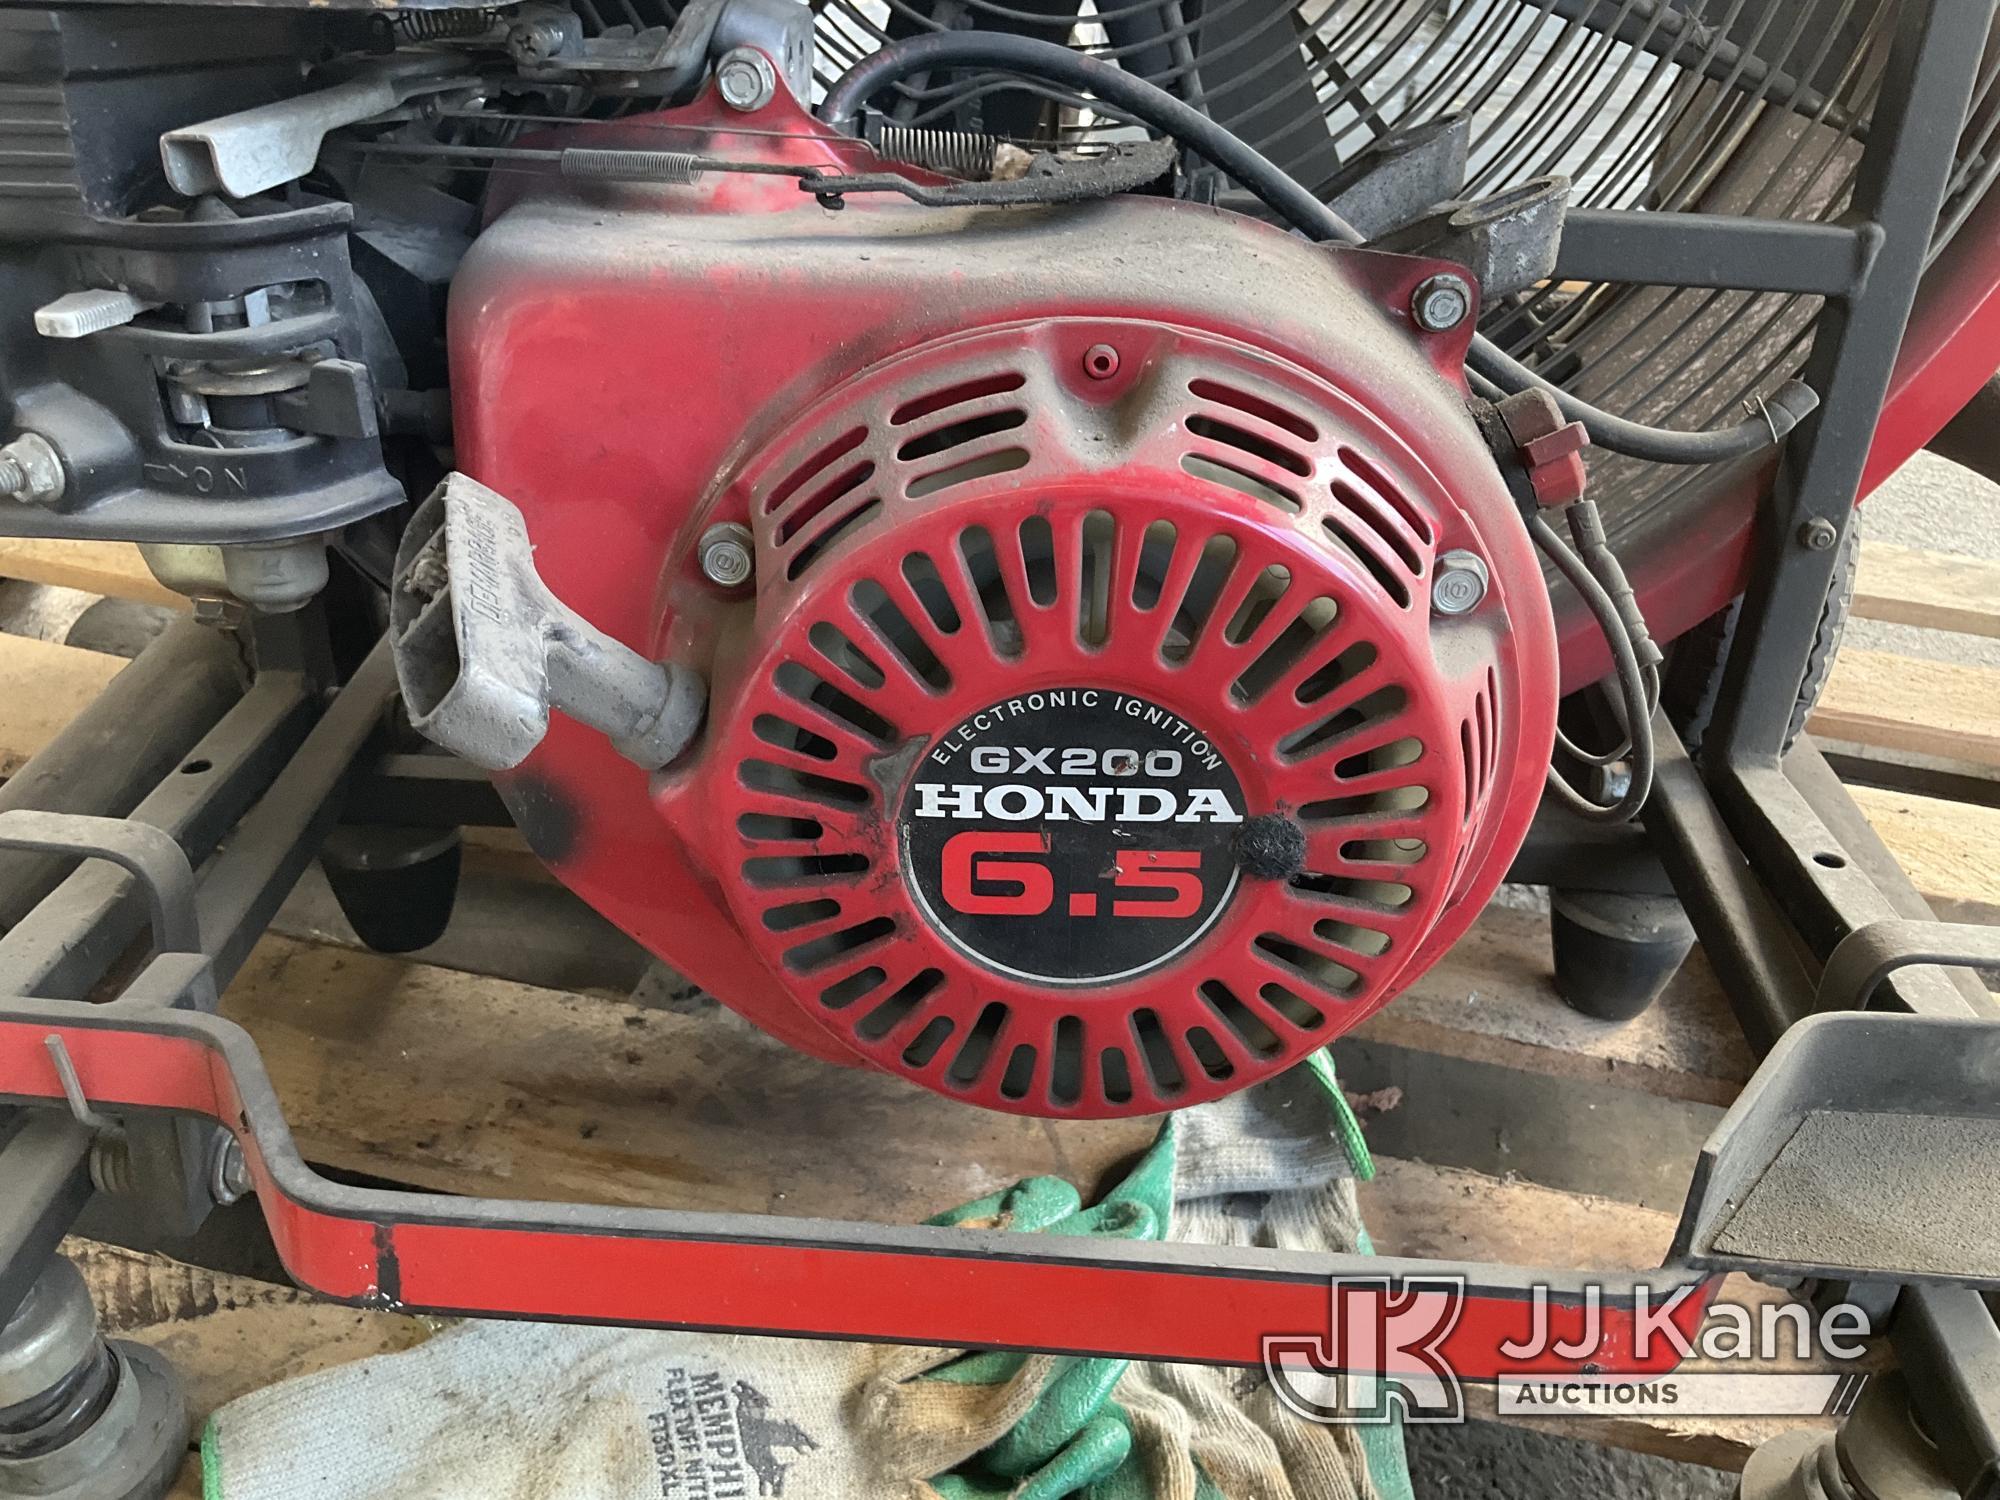 (Jurupa Valley, CA) Tempest Power Blower / Fan (Used) NOTE: This unit is being sold AS IS/WHERE IS v